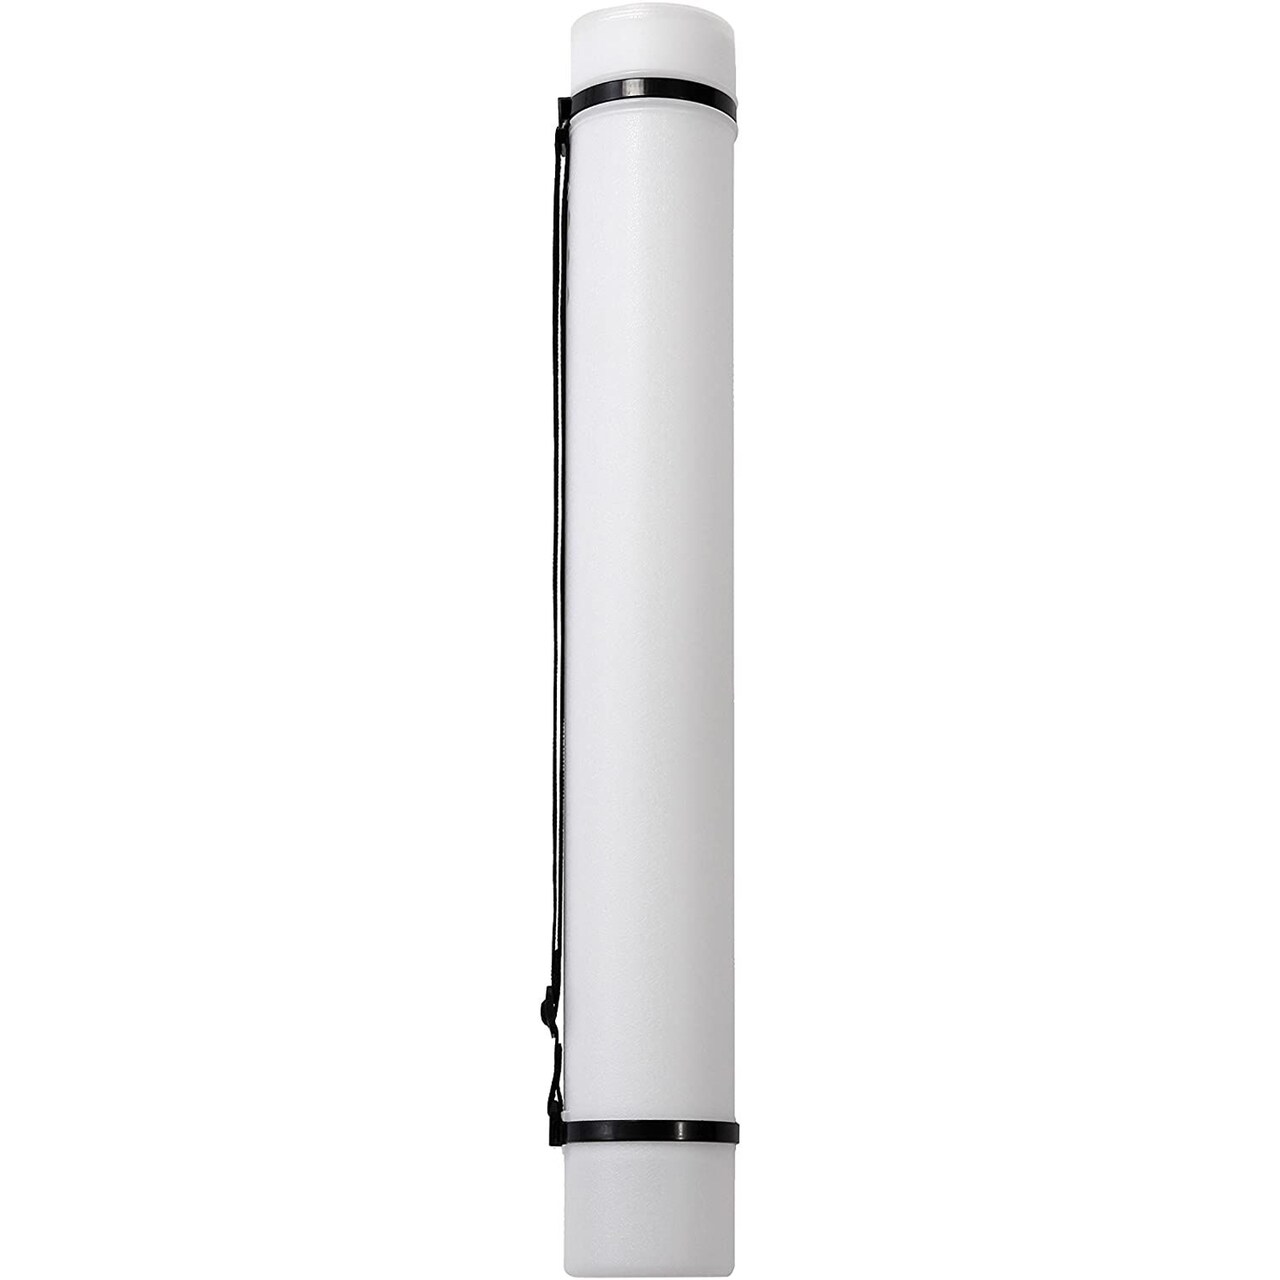 Expandable Poster Tube with Strap for Posters, Documents, Artwork,  Blueprint Storage, Carrying Case for Architects, Teachers, Students,  Artists (White, 24 to 40 Inches)